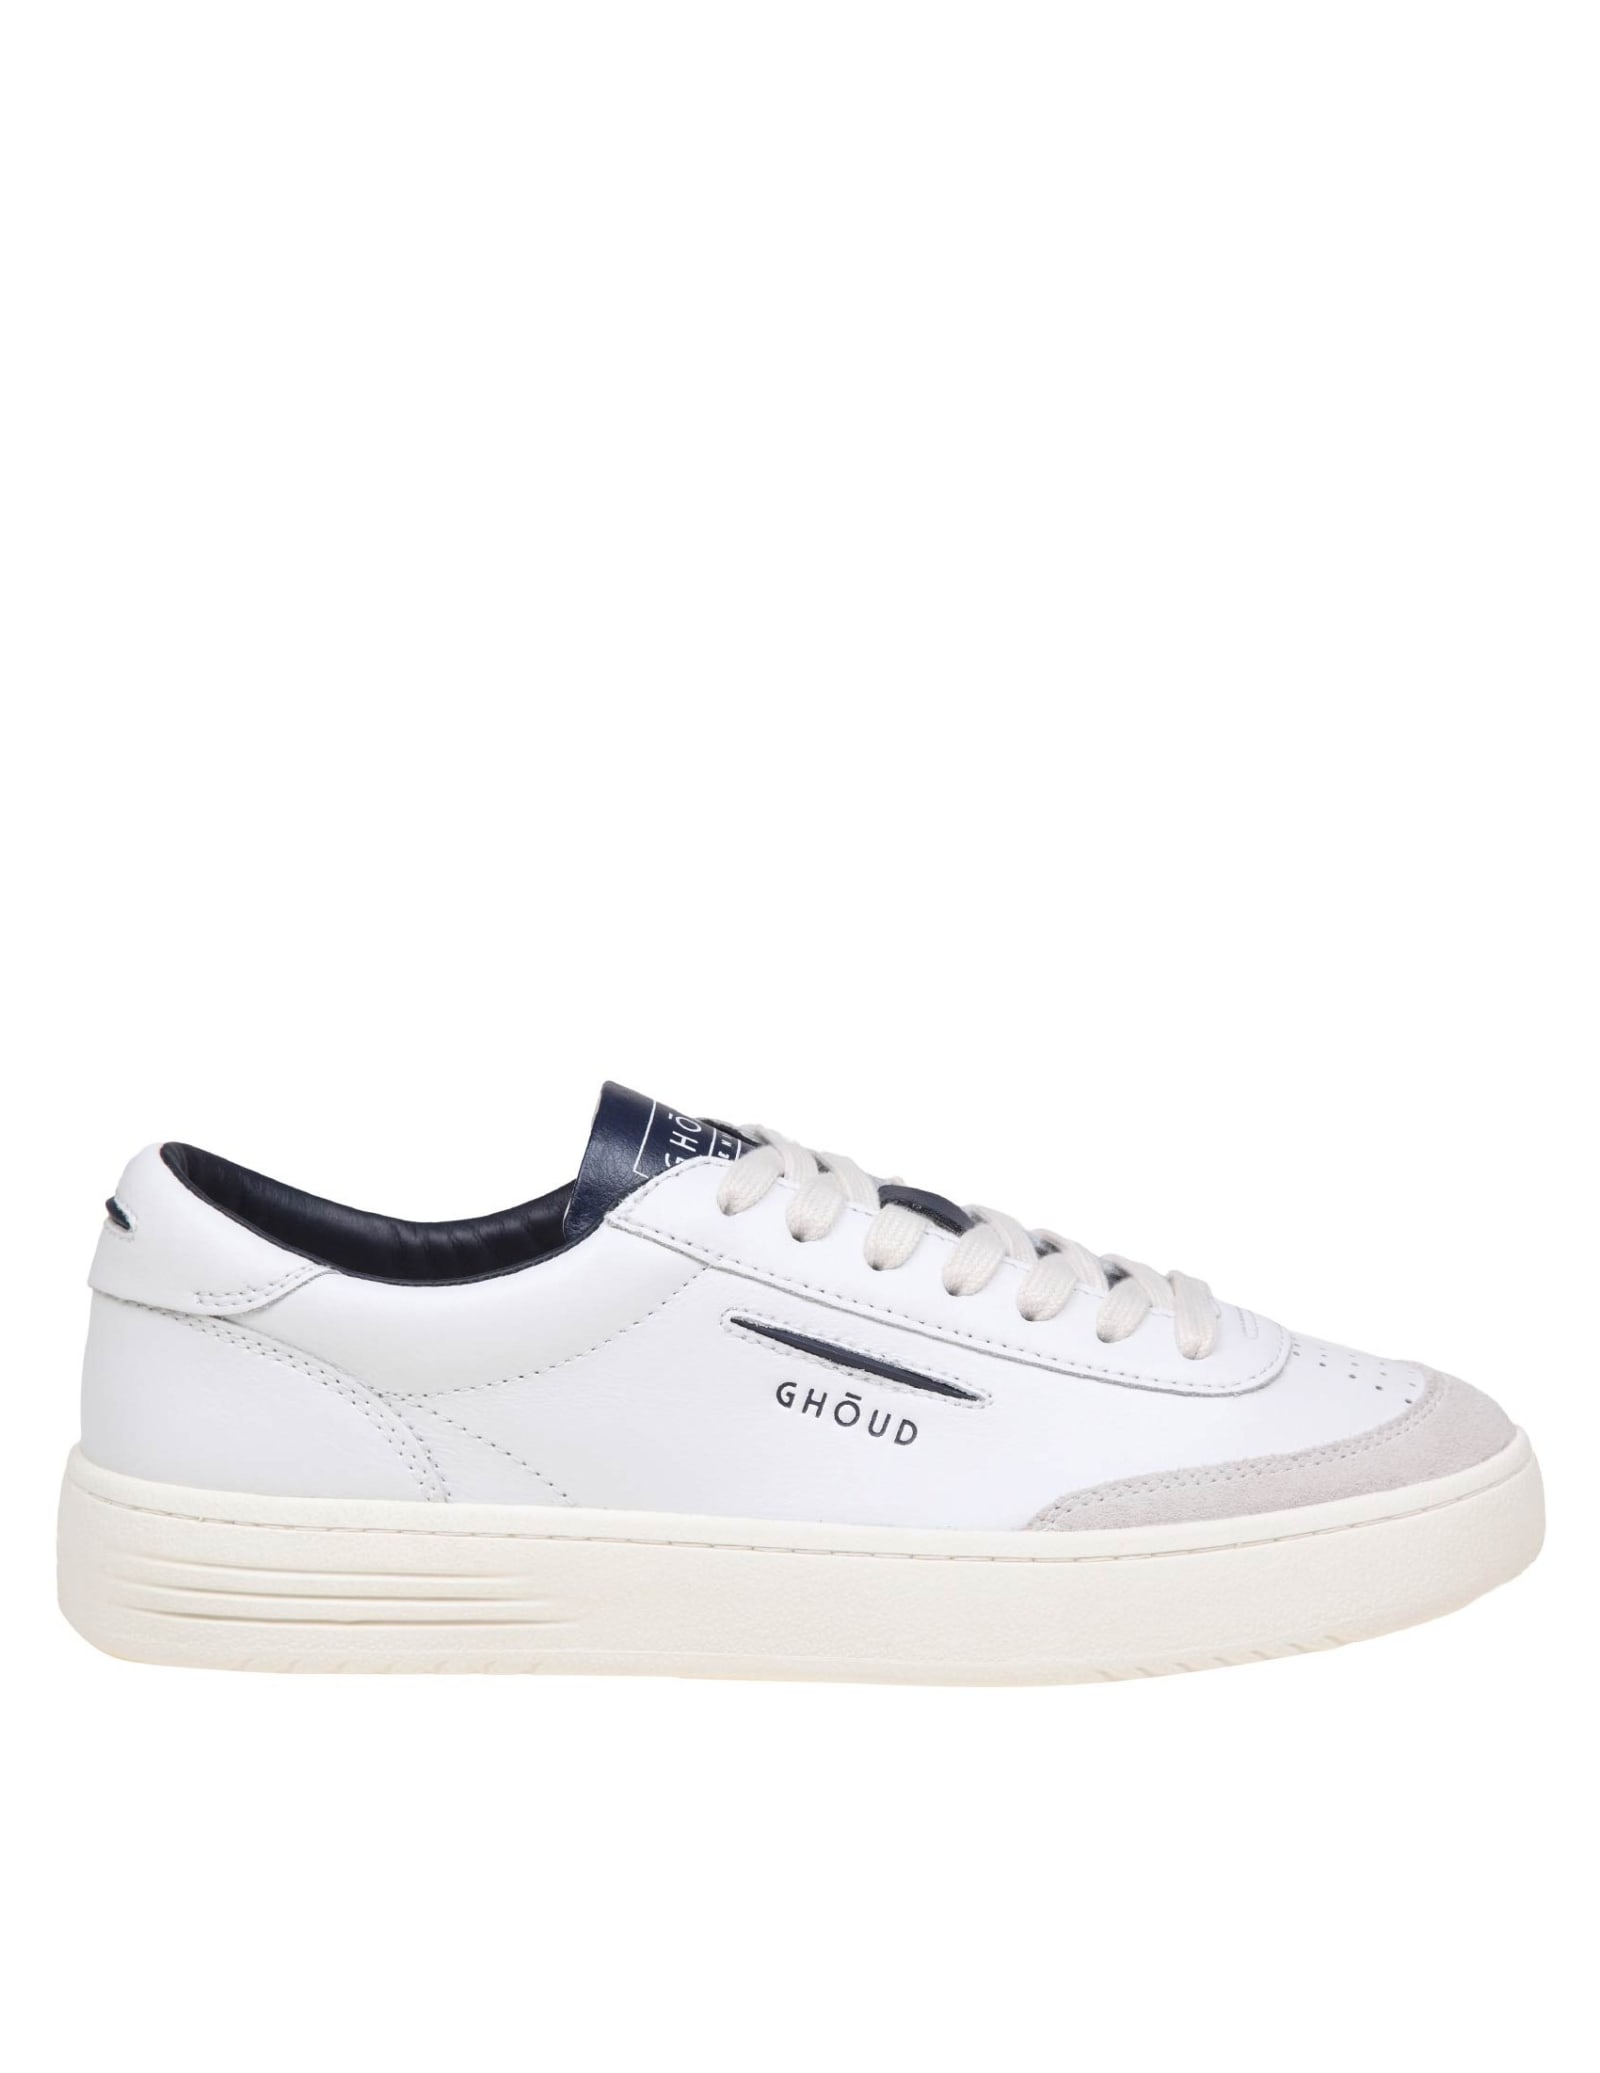 Ghoud Lido Low Sneakers In White/blue Leather And Suede